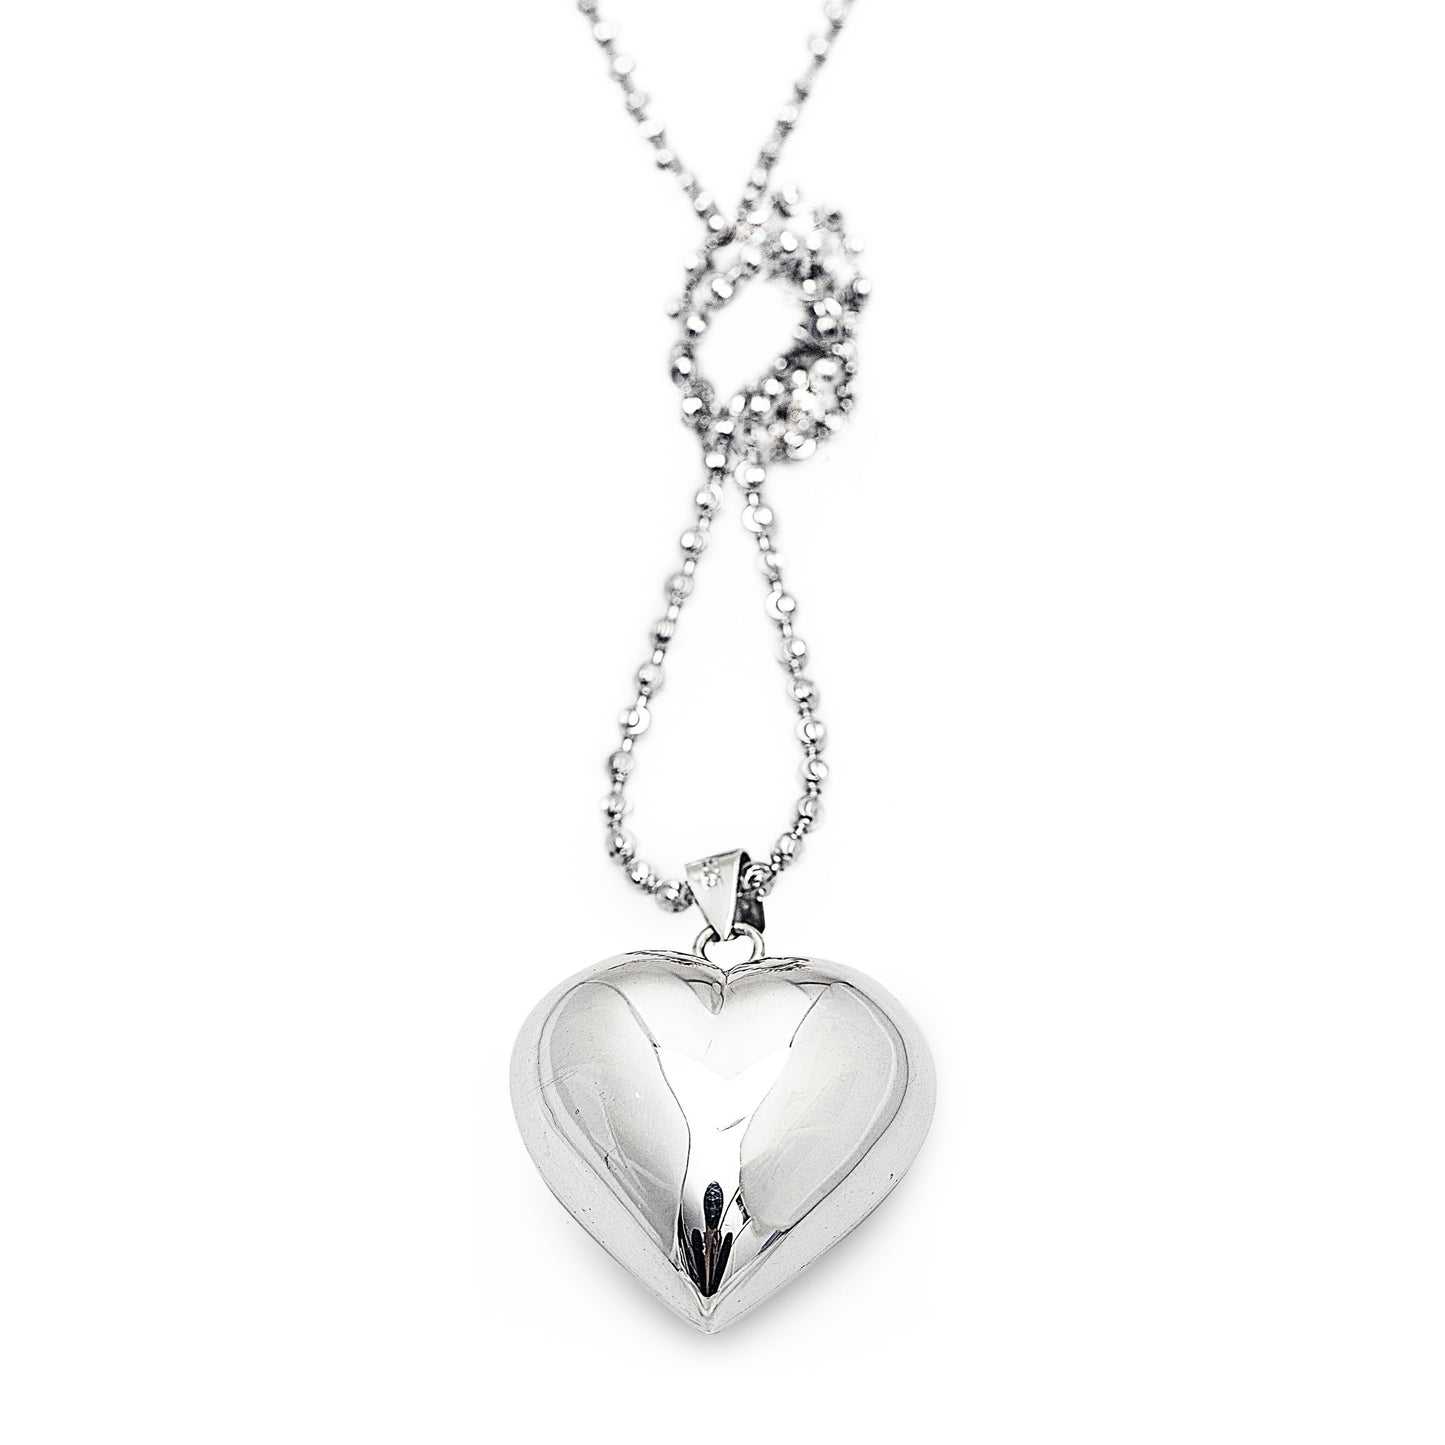 Summer Love Necklace in 925 sterling silver with a large heart pendant with chime. Worldwide shipping. Affordable luxury jewellery by Bellagio & Co.